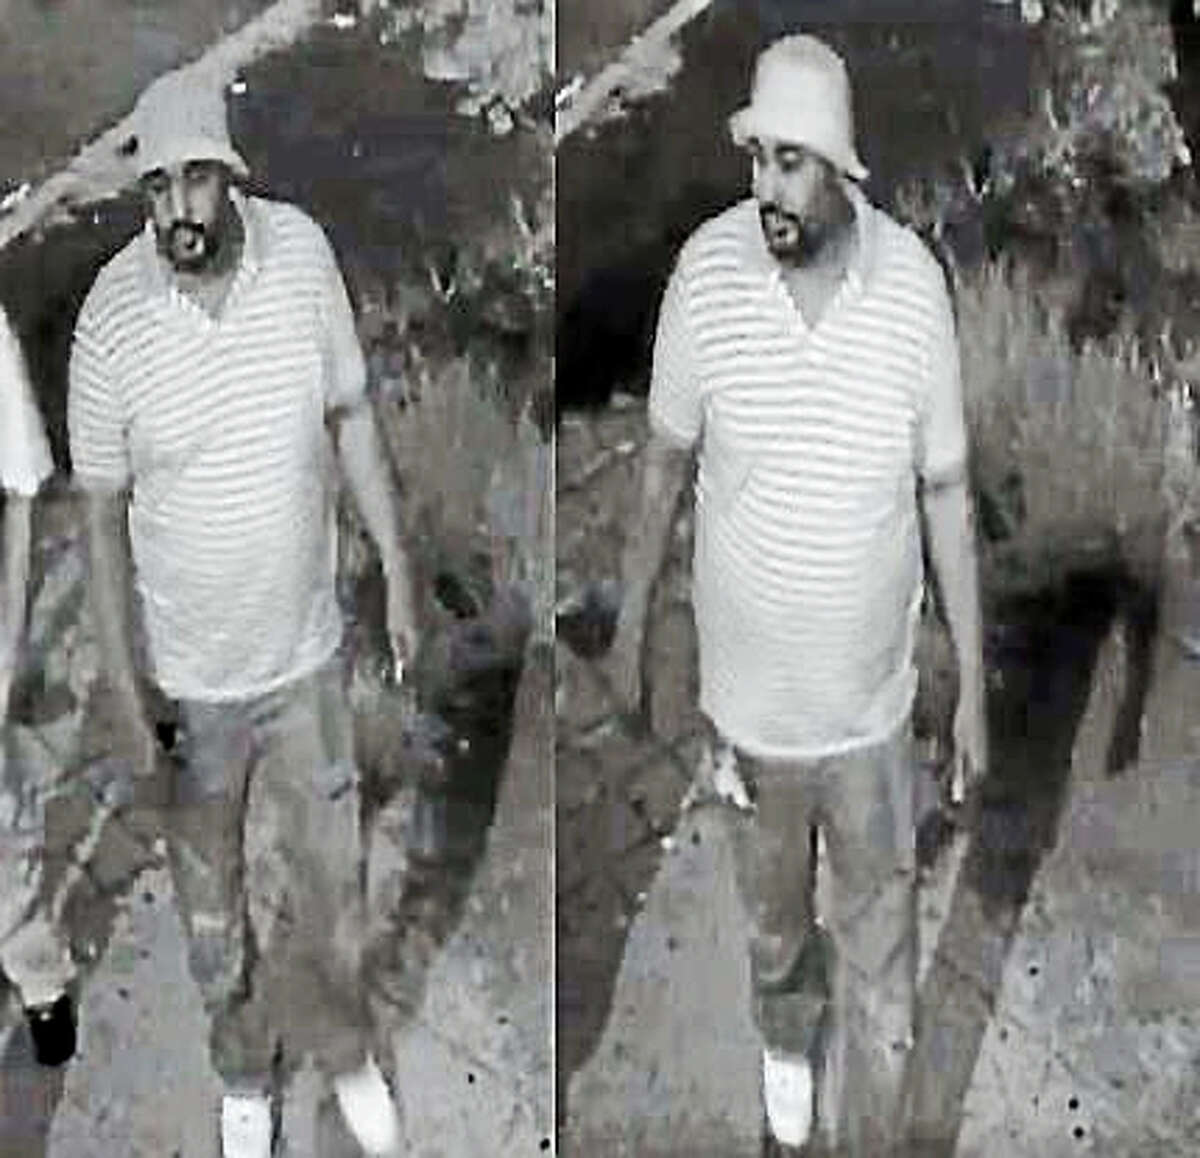 Police released these two photos of a suspect who is accused of shooting four people last weekend at the Highwood Bar & Grill.